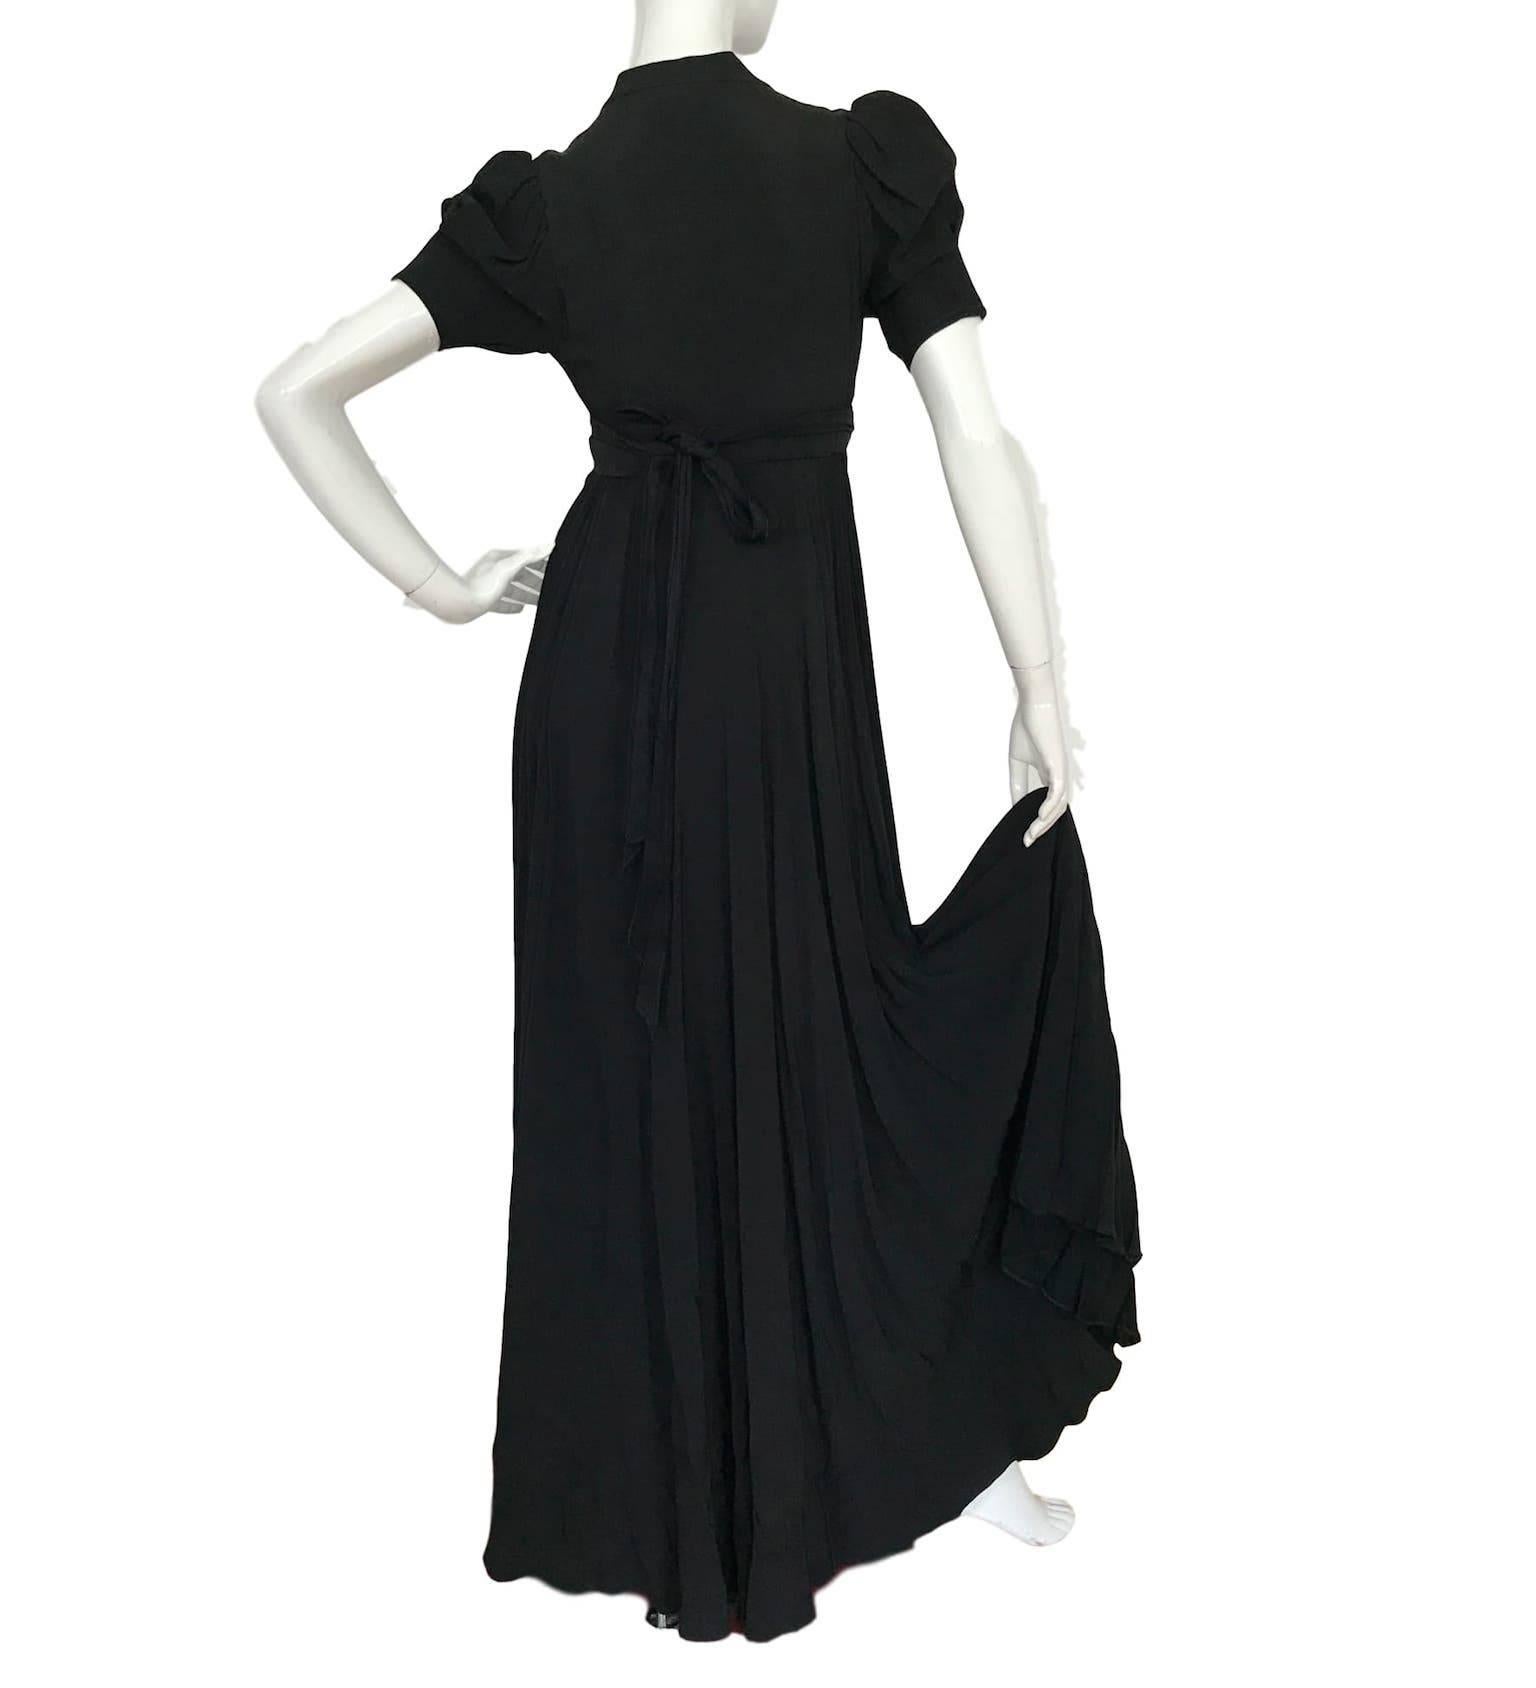 Ossie Clark Quorum black crepe wrap dress. Low cut bust wrap fastening and pleated full skirt. 32 bust 26 waist and 62 inches length. 
Excellent condition with minor pin holes to back and one hook/eye closure missing. 
